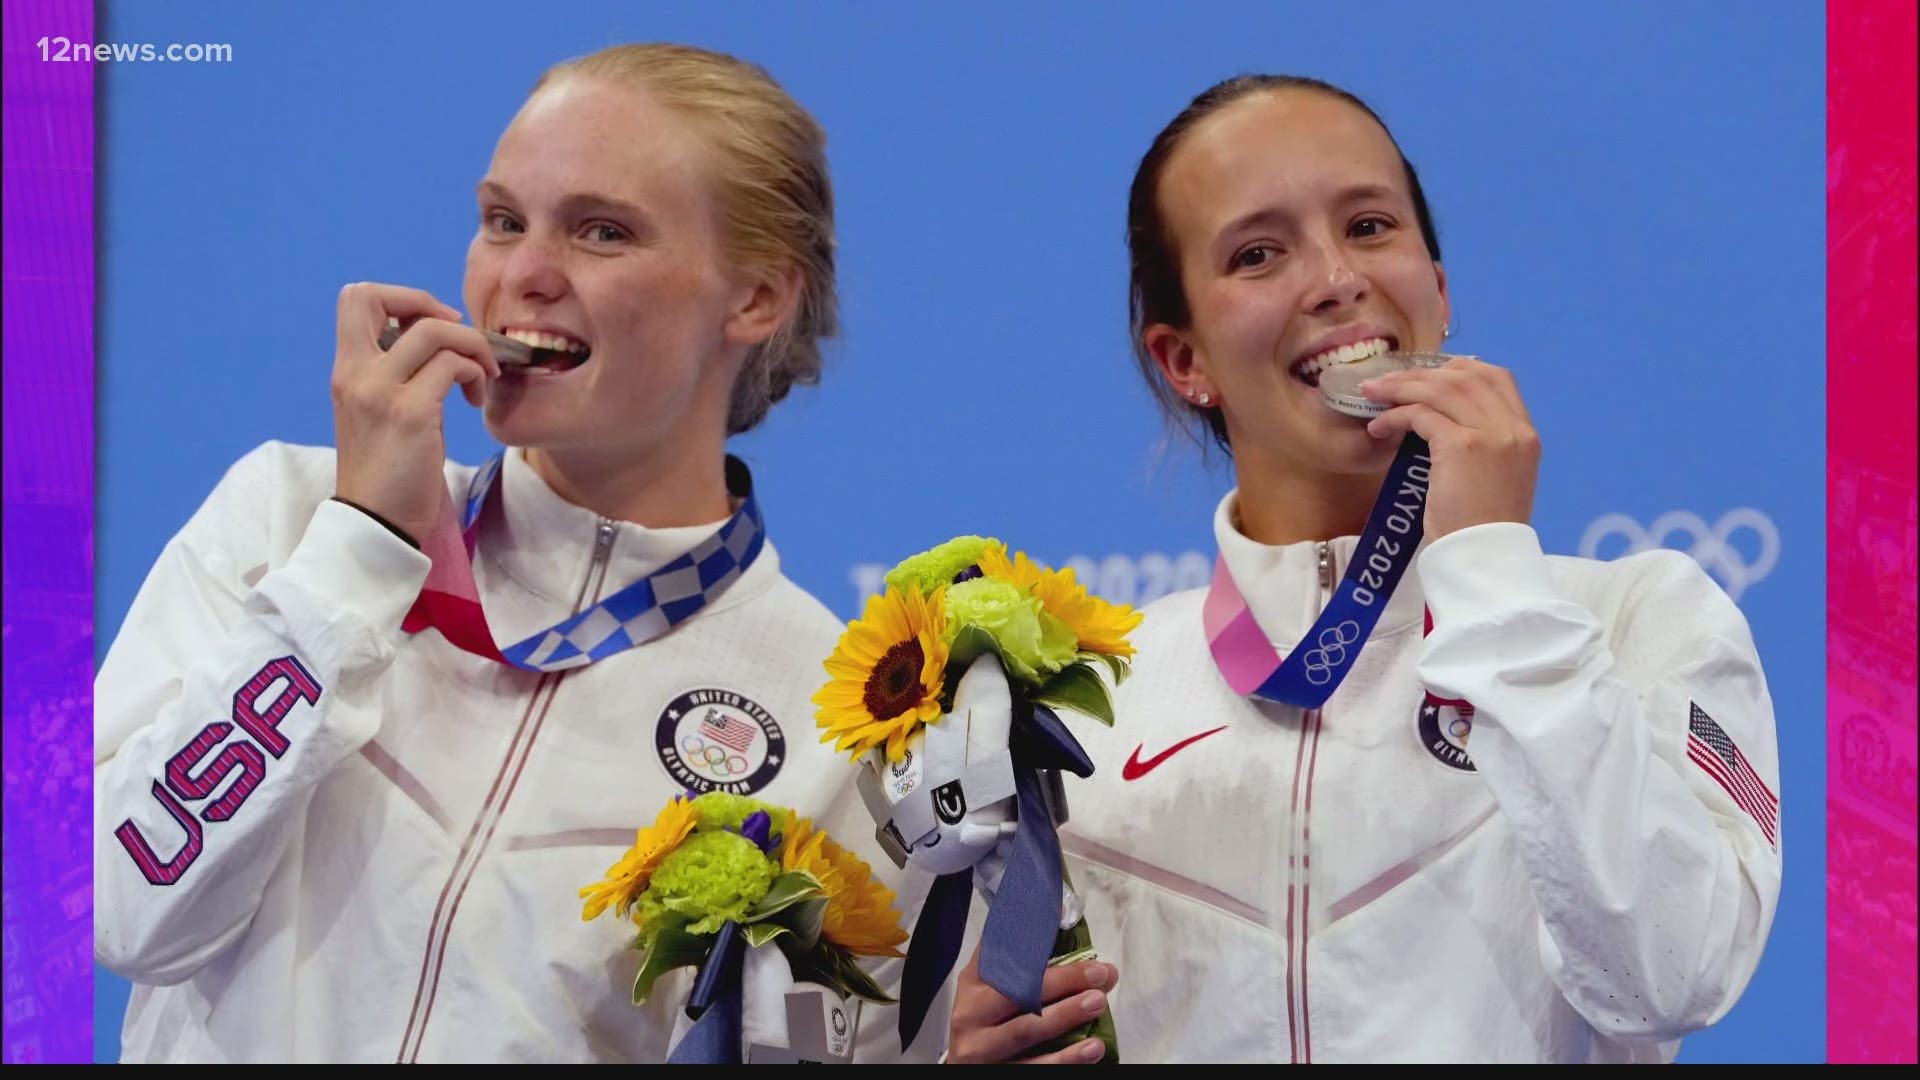 2 Tucson athletes bringing home medals from the Tokyo Olympics